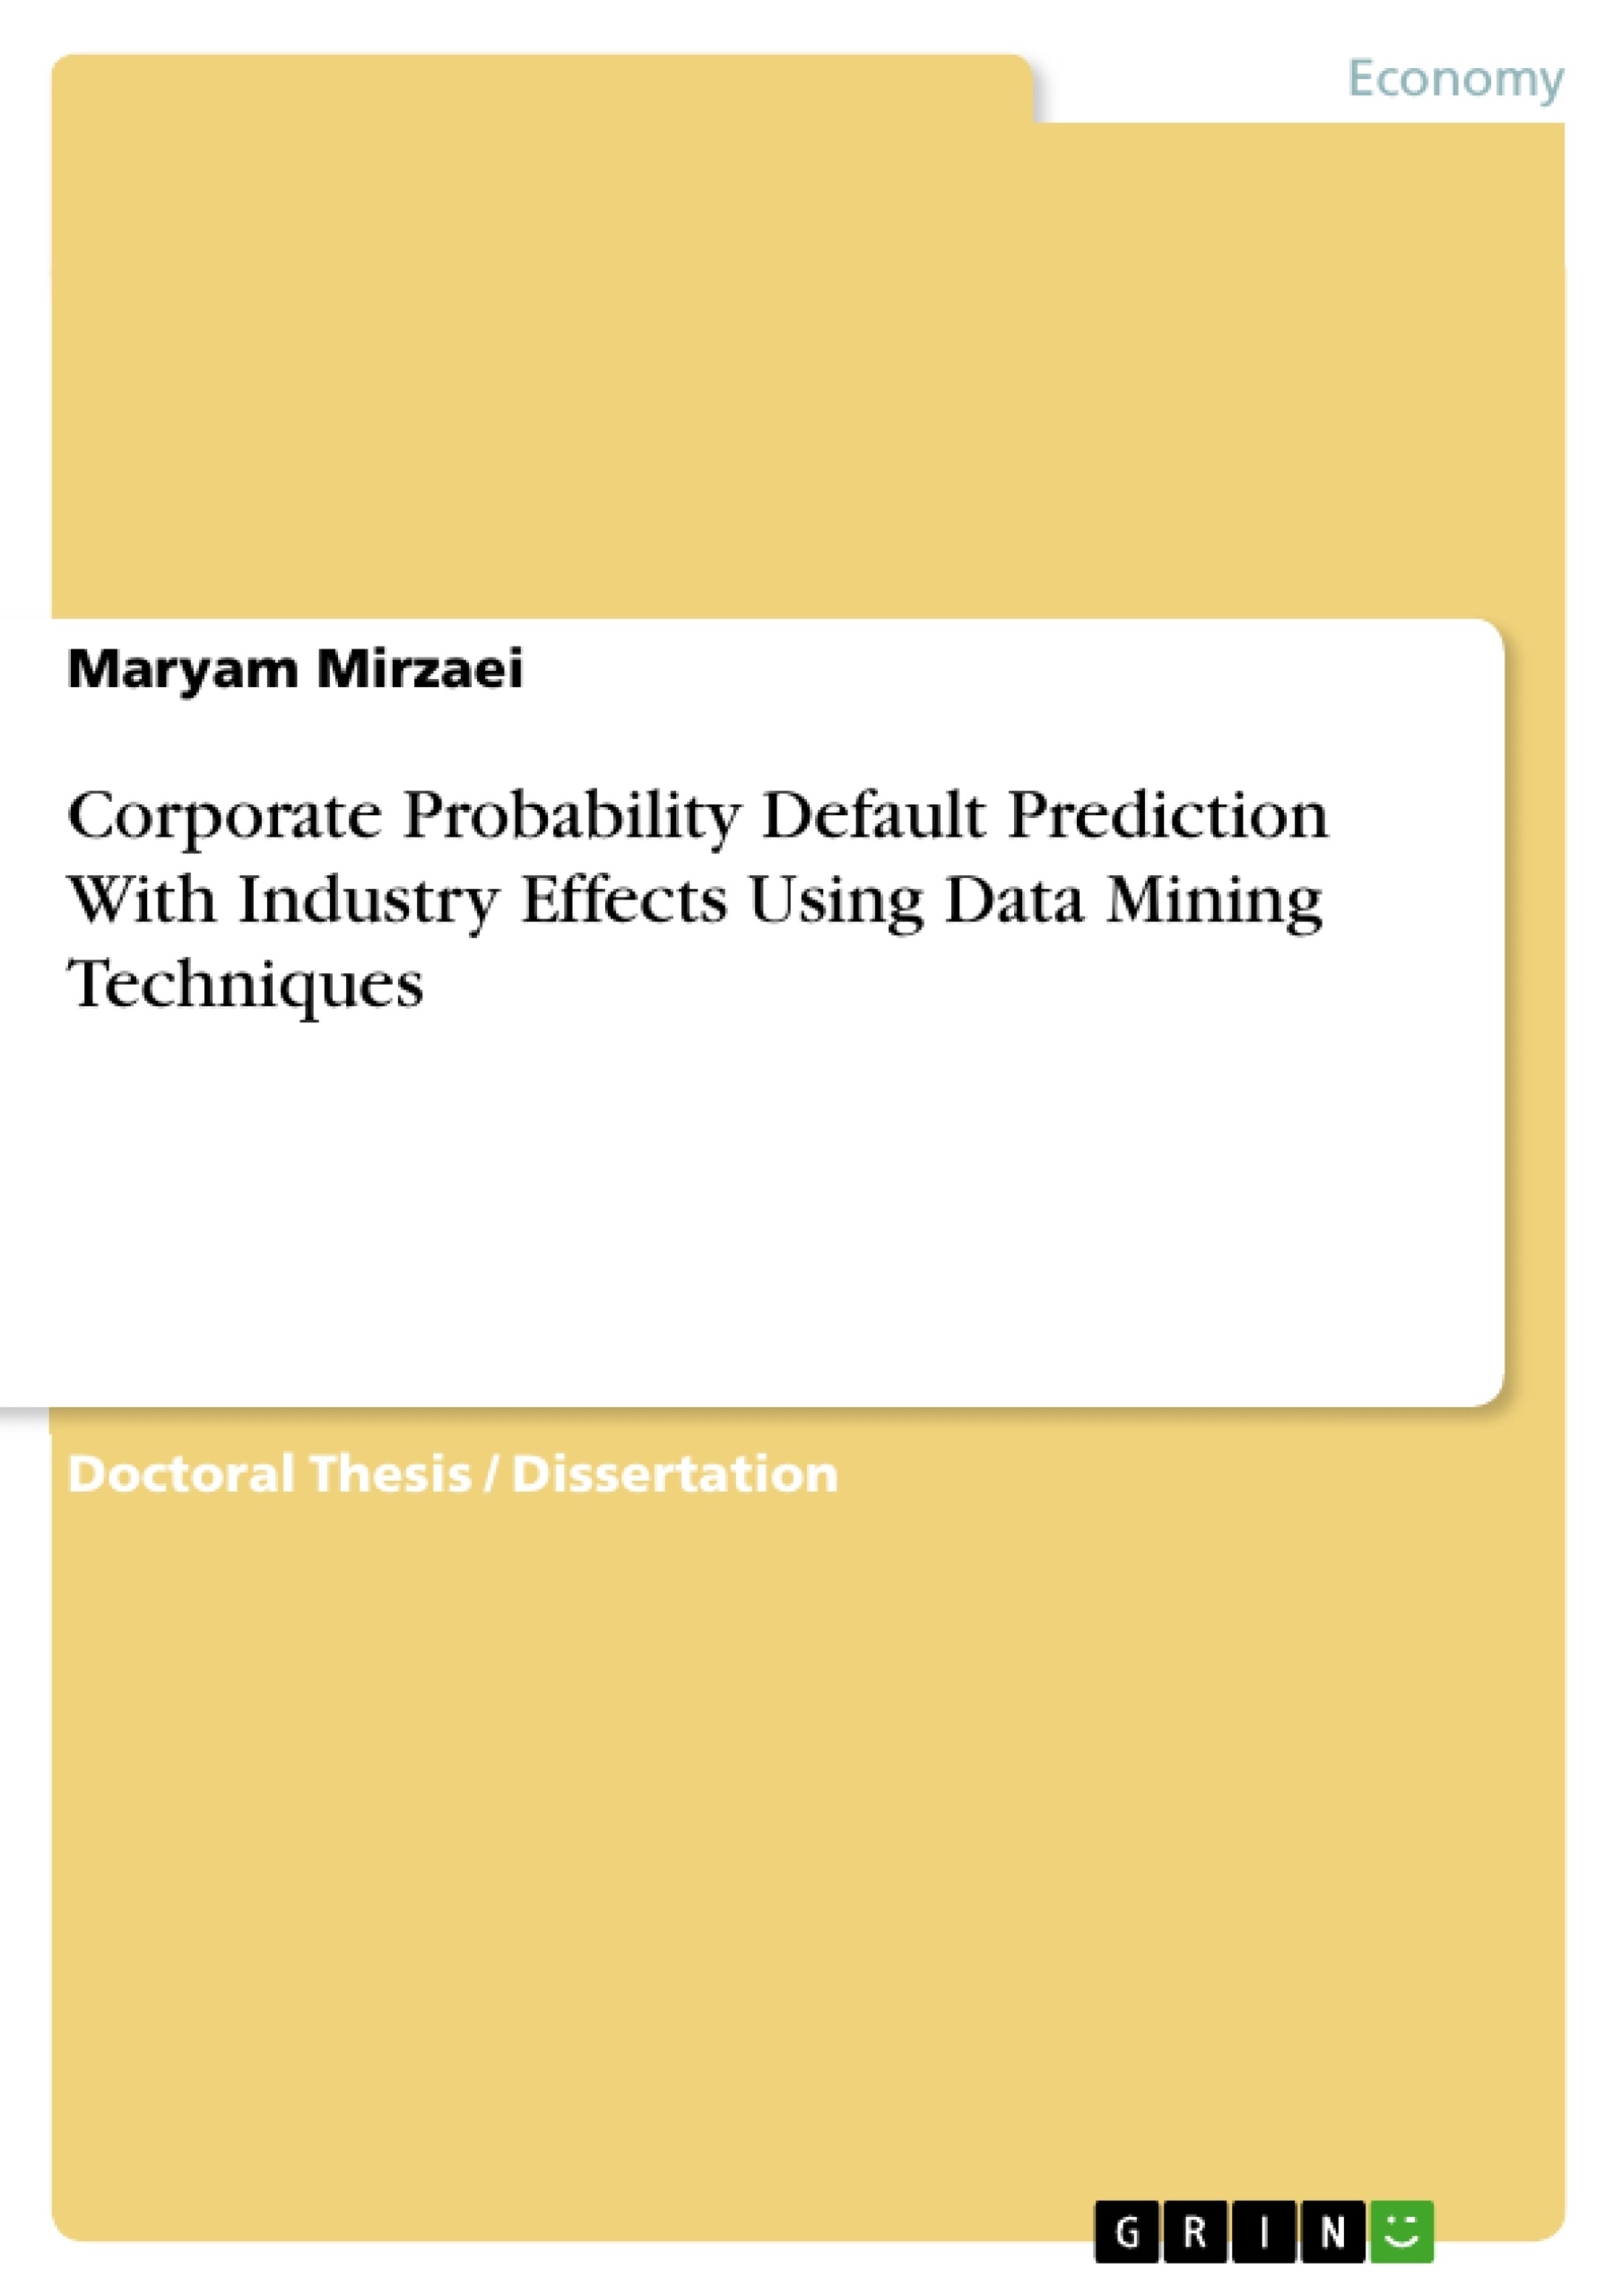 Titel: Corporate Probability Default Prediction With Industry Effects Using Data Mining Techniques